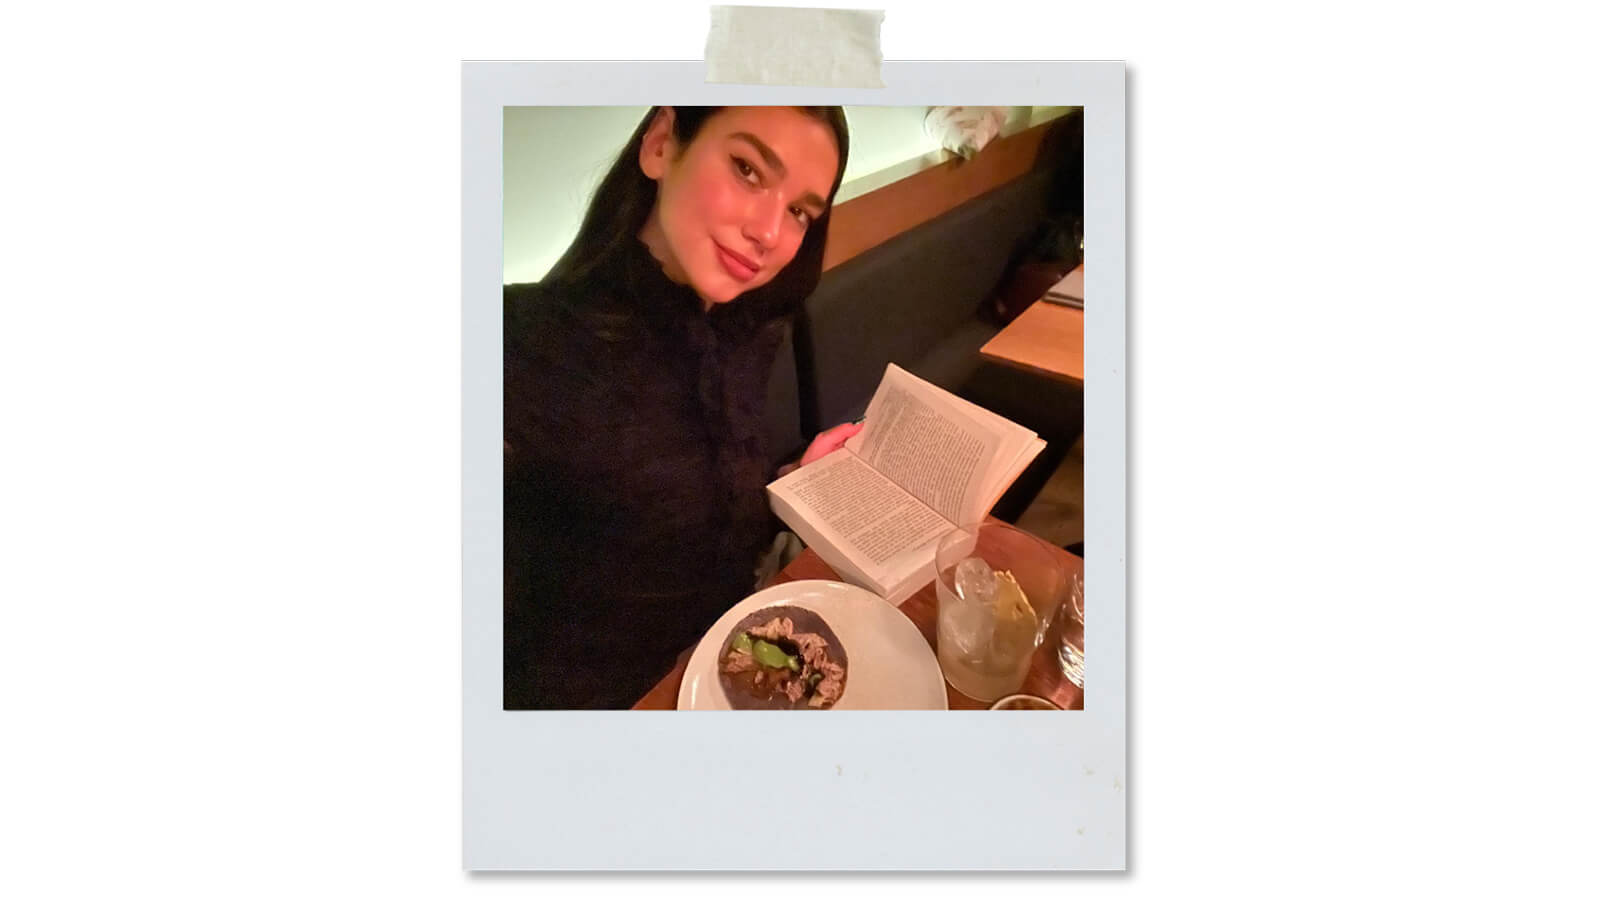 Dua Lipa reads book at dinner table, where she is eating a taco